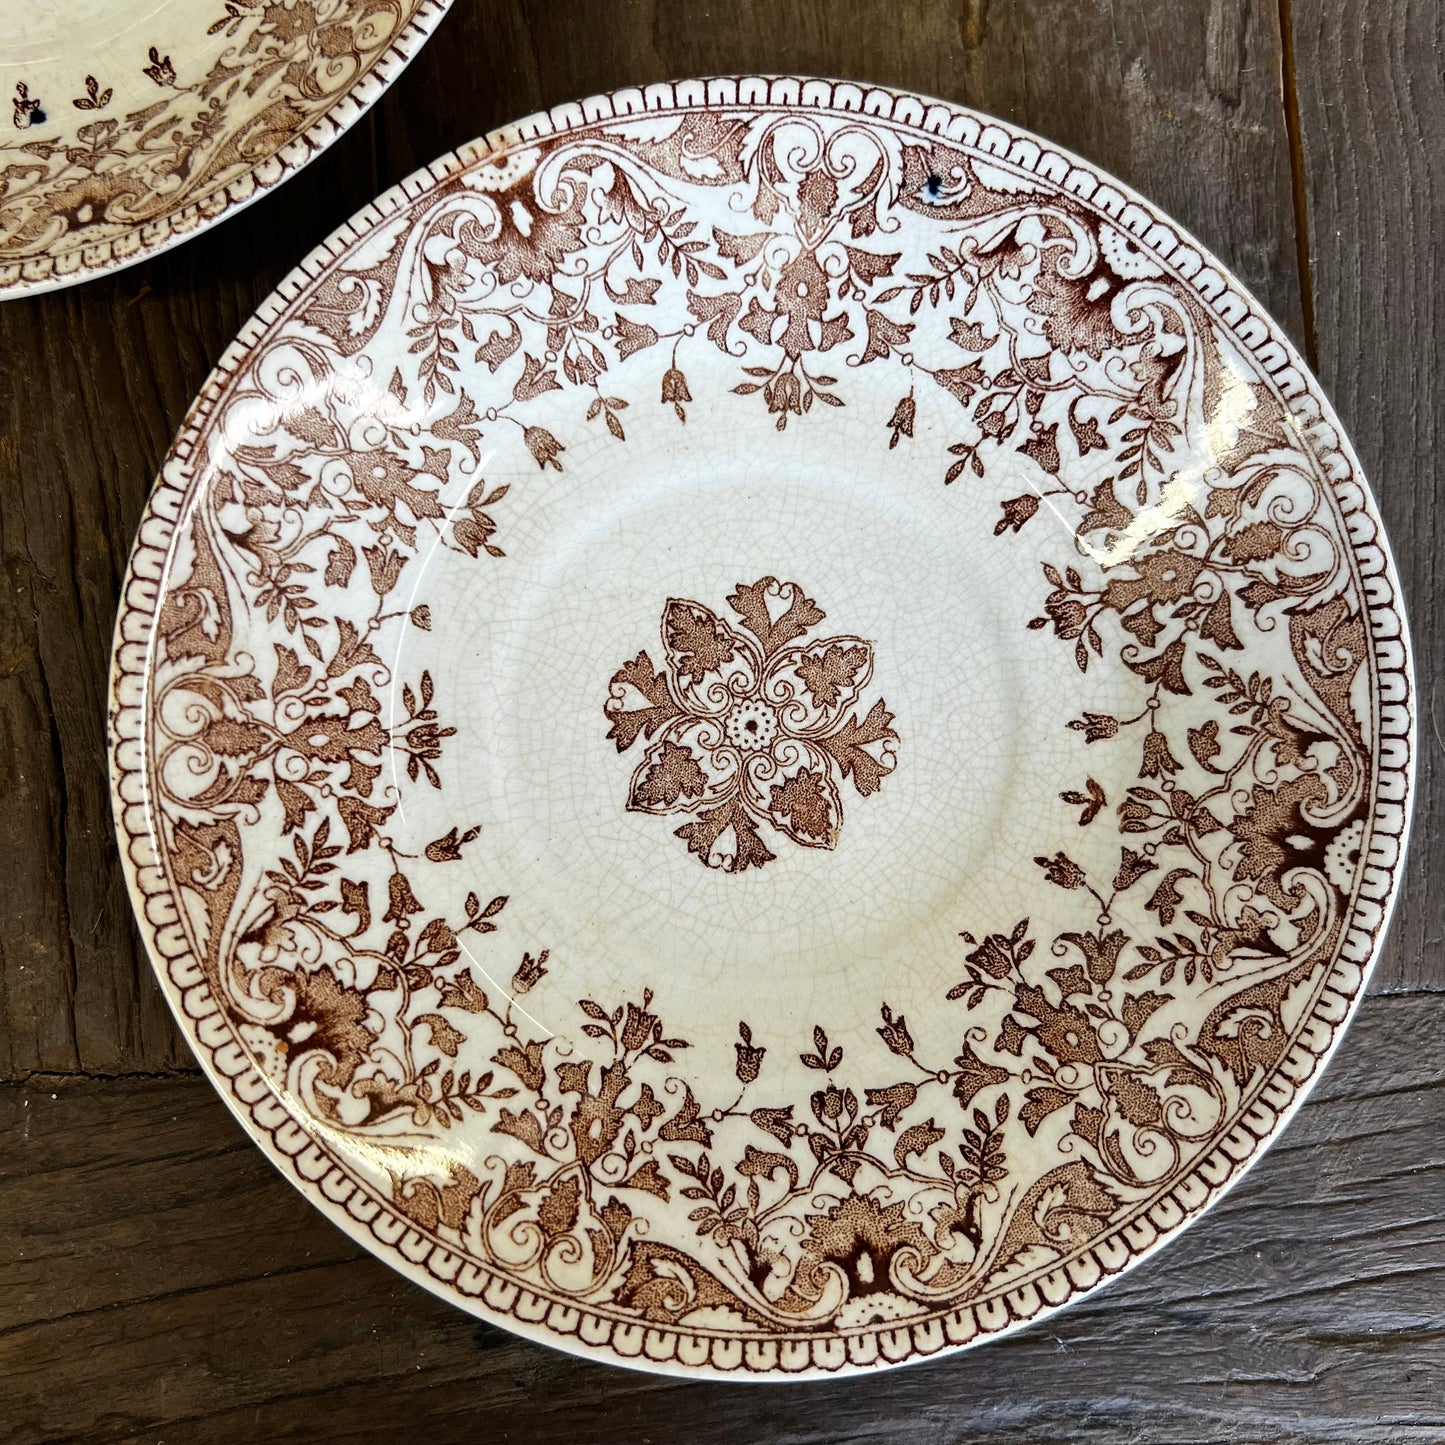 Two Ridgeways Tournay Brown Transferware 6.5" Berry Bowl Saucer Dishes Floral Aesthetic Movement